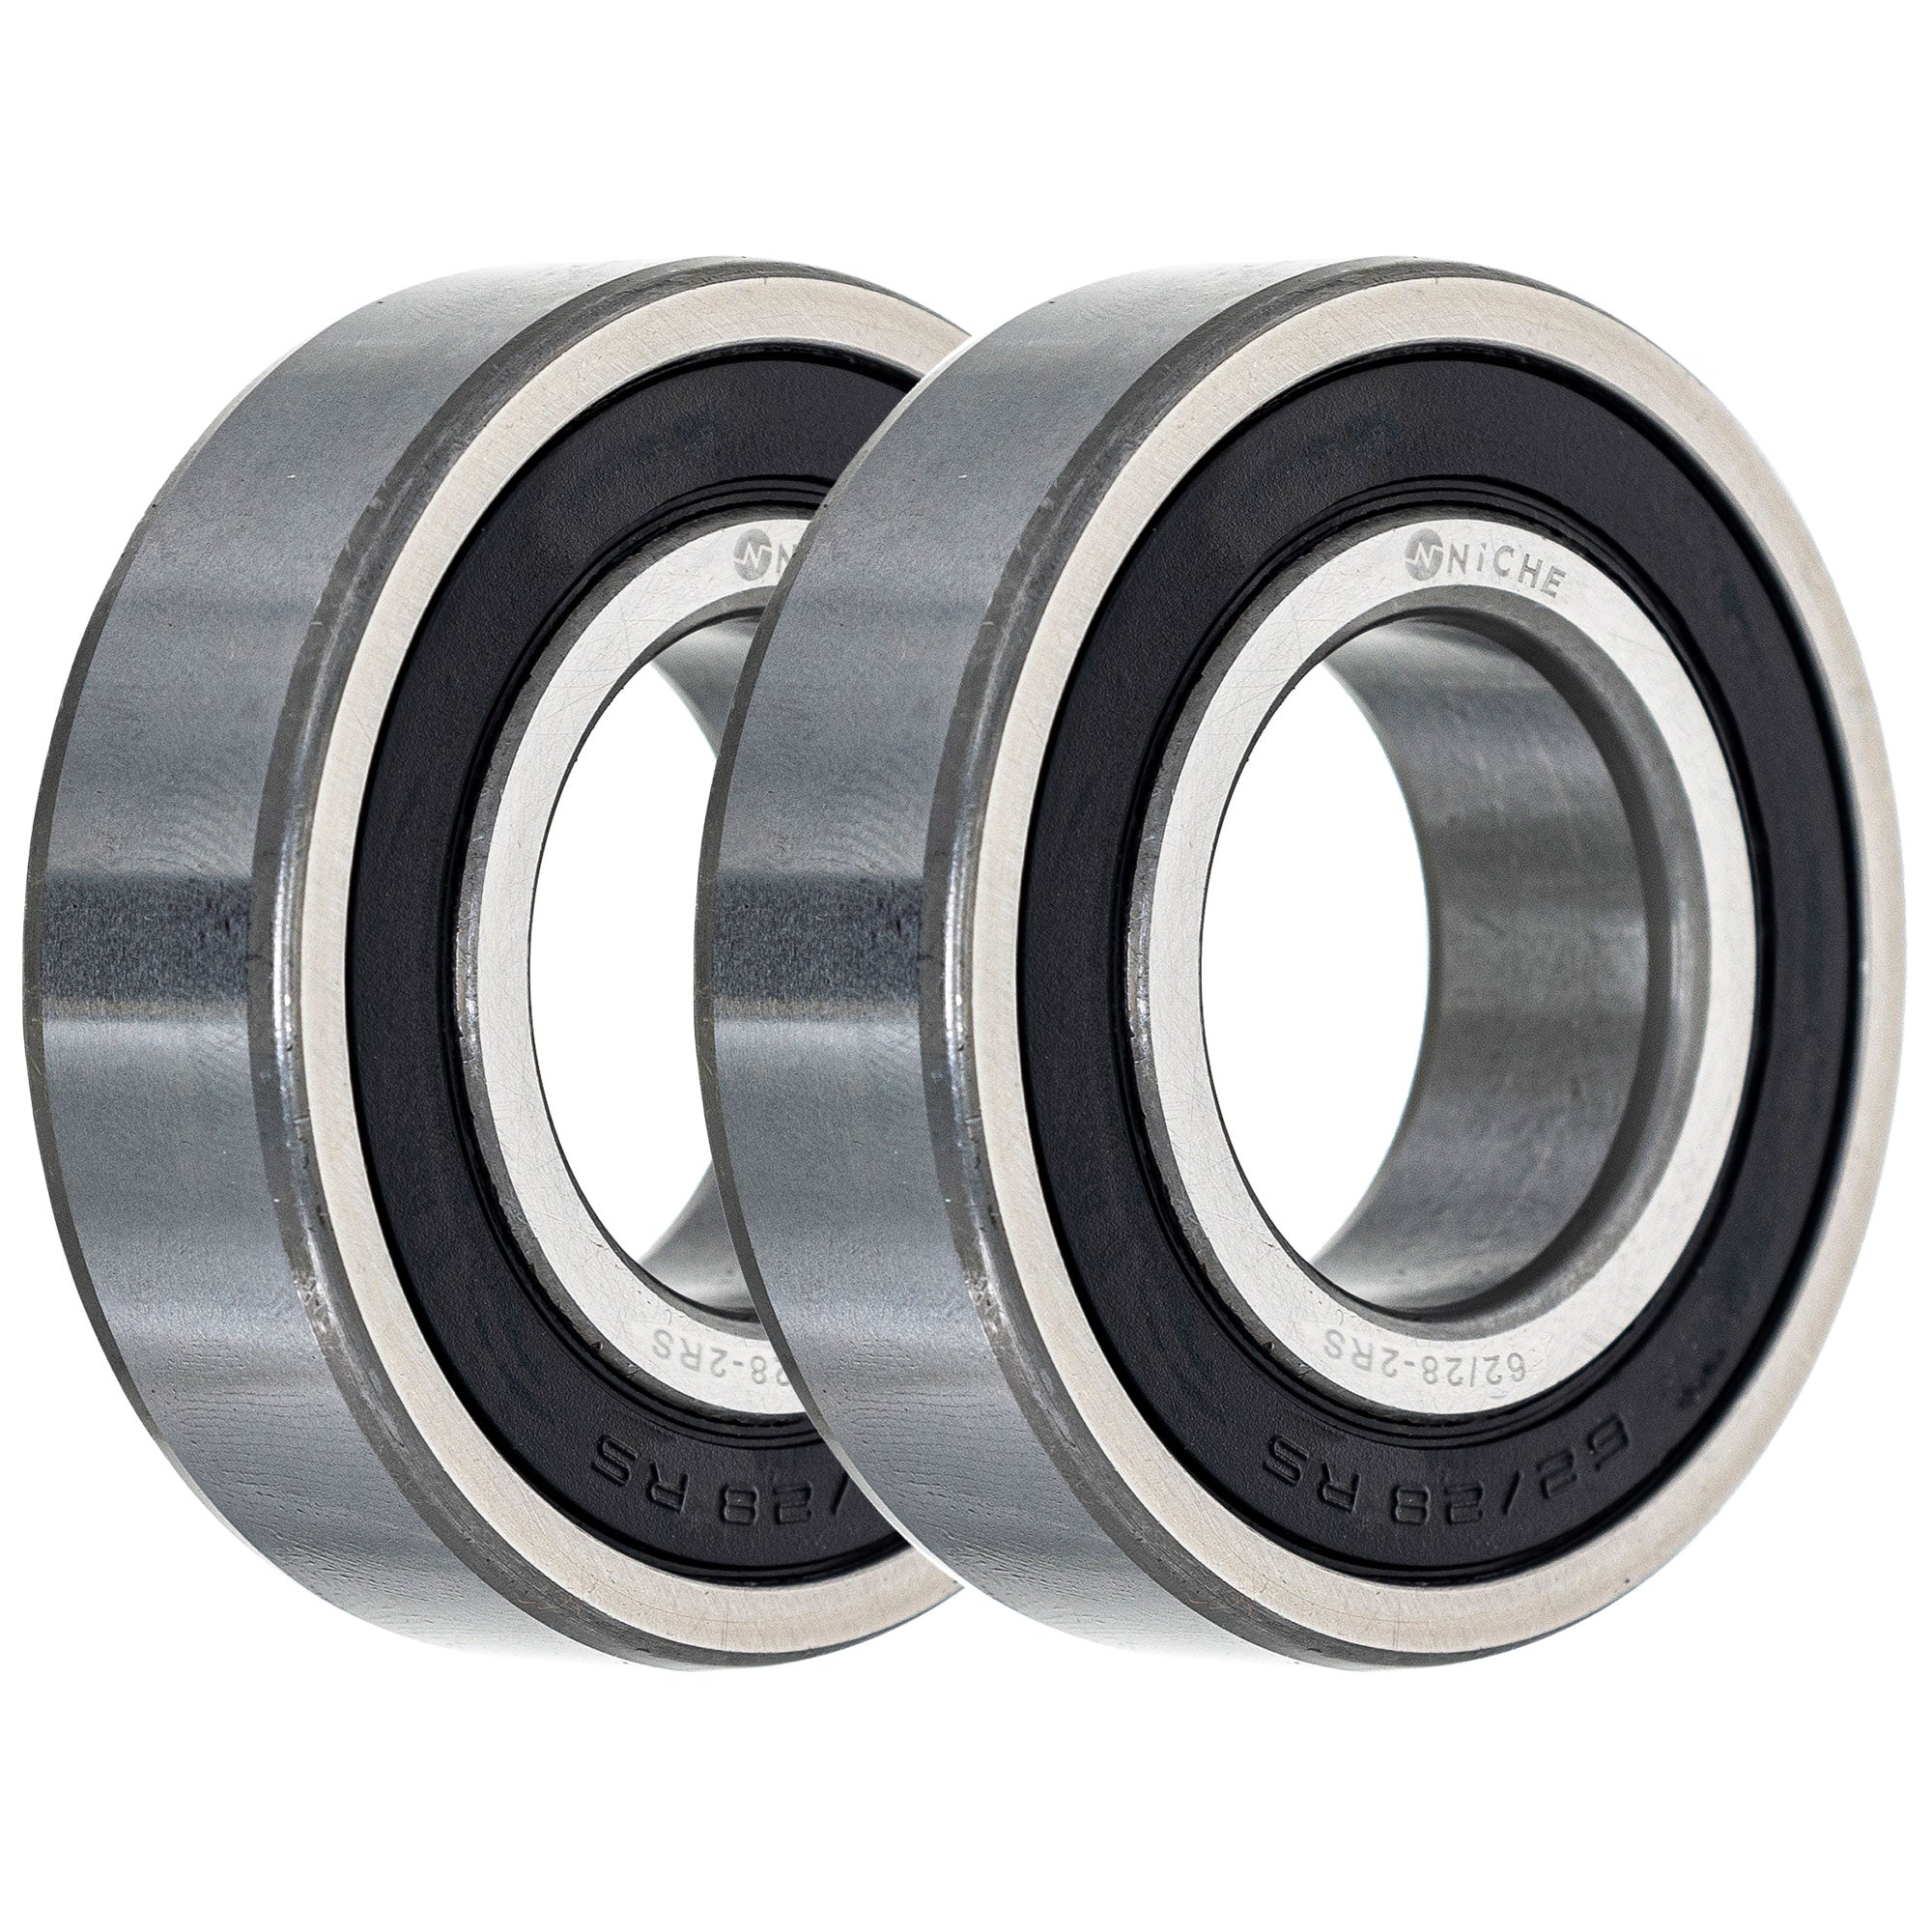 Single Row, Deep Groove, Ball Bearing Pack of 2 2-Pack for zOTHER YZF VFR750R TRX450 NICHE 519-CBB2235R